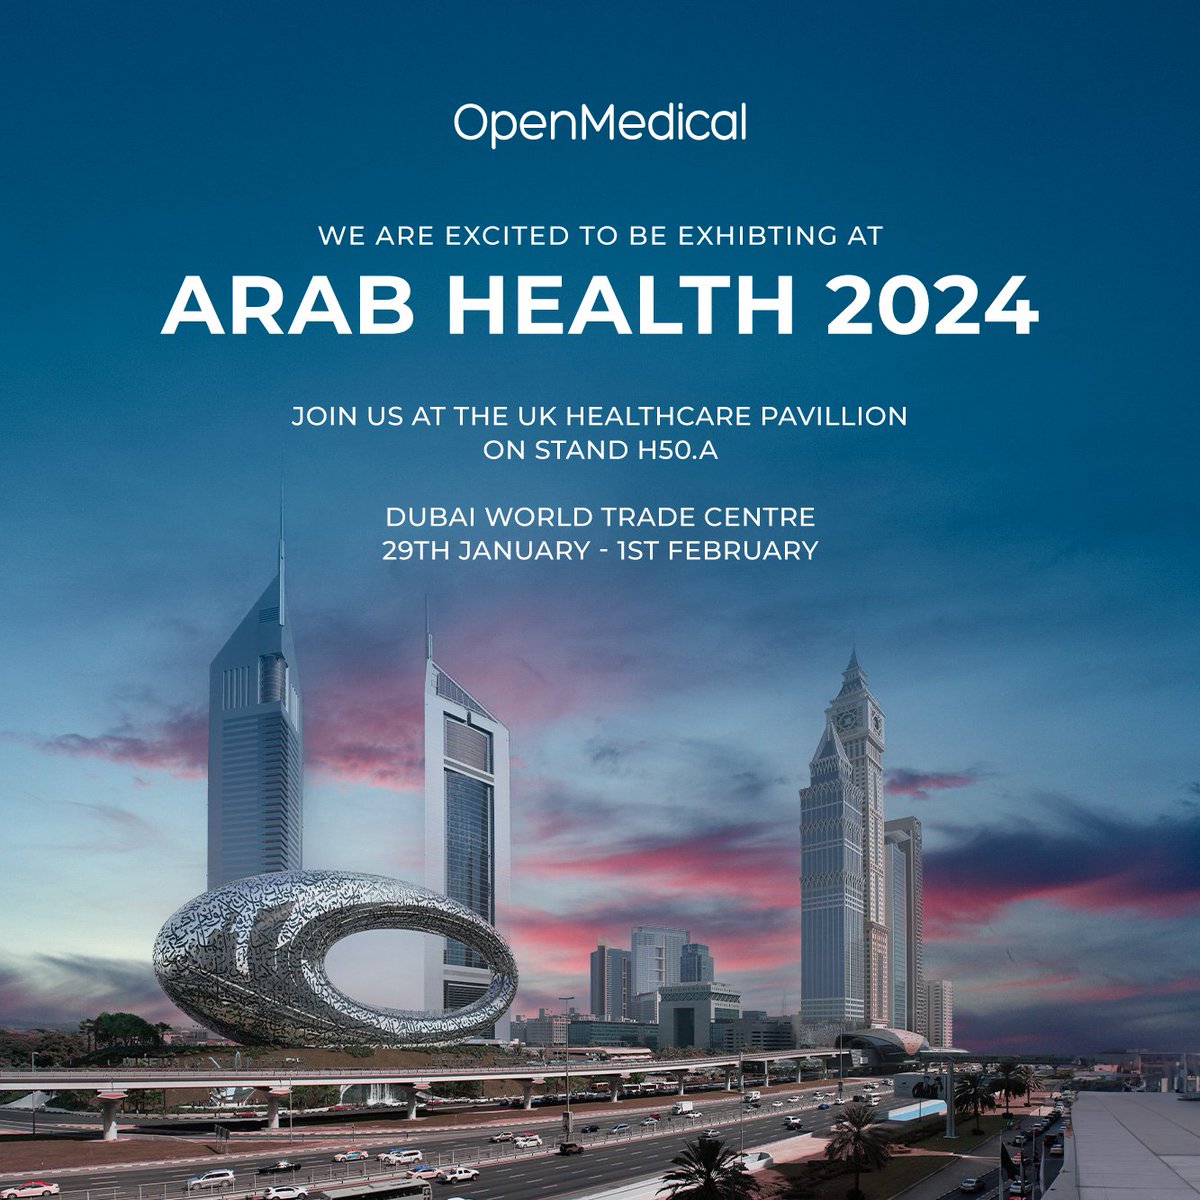 We're exhibiting at @Arab_Health Exhibition 2024! ✨ Join us on stand H50.A as part of the @UK_pavilion, and keep an eye out for more information to come on the panel session we are hosting on 'Enabling Value-Based Care'. @UK_ABHI #ArabHealth2024 #ABHIUKPavilion #UKinnovation